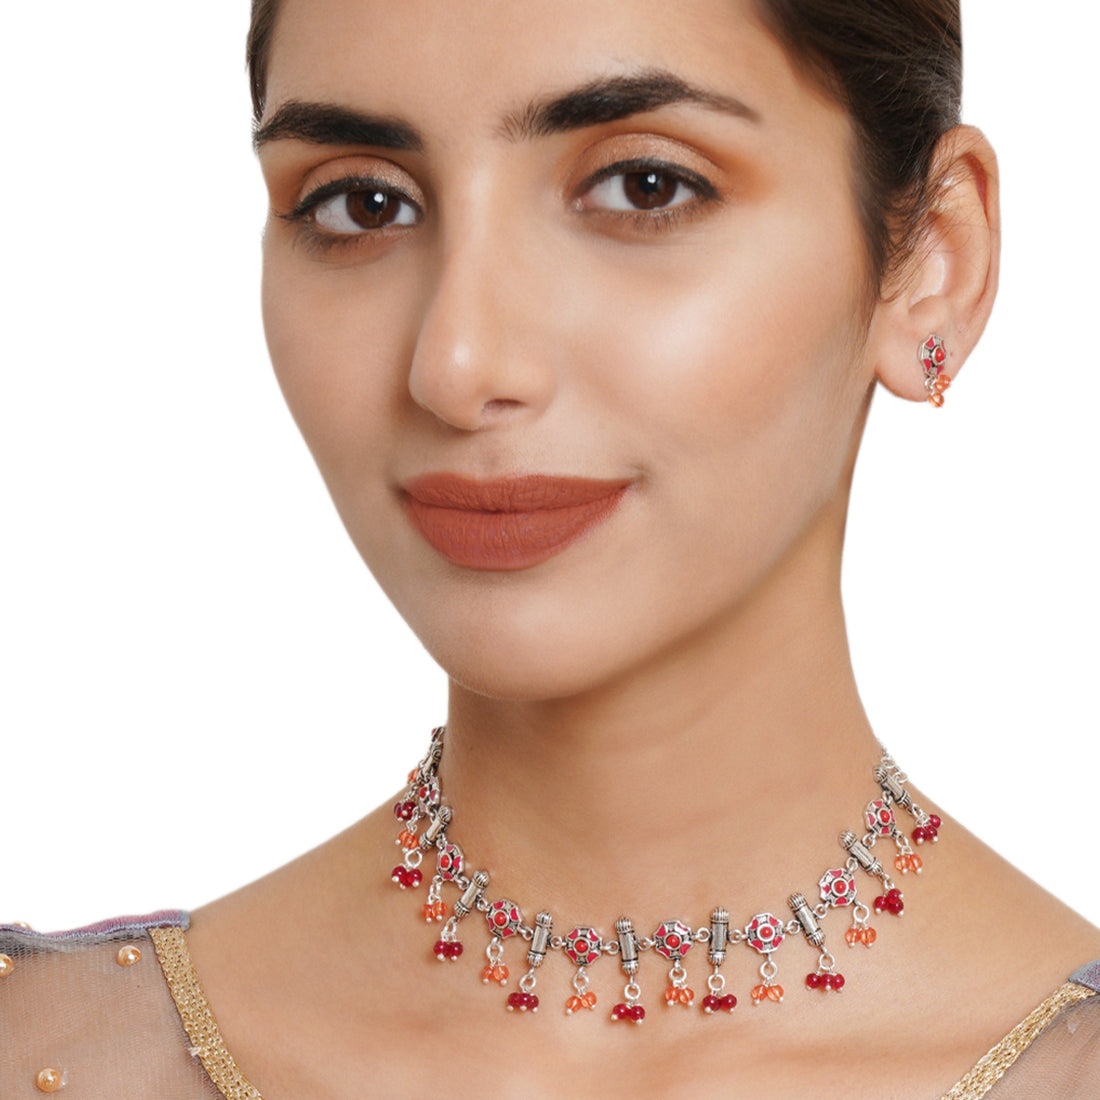 Festive Hues Intricate Enameled Choker Necklace Set with Artisanal Motifs and Red Beads